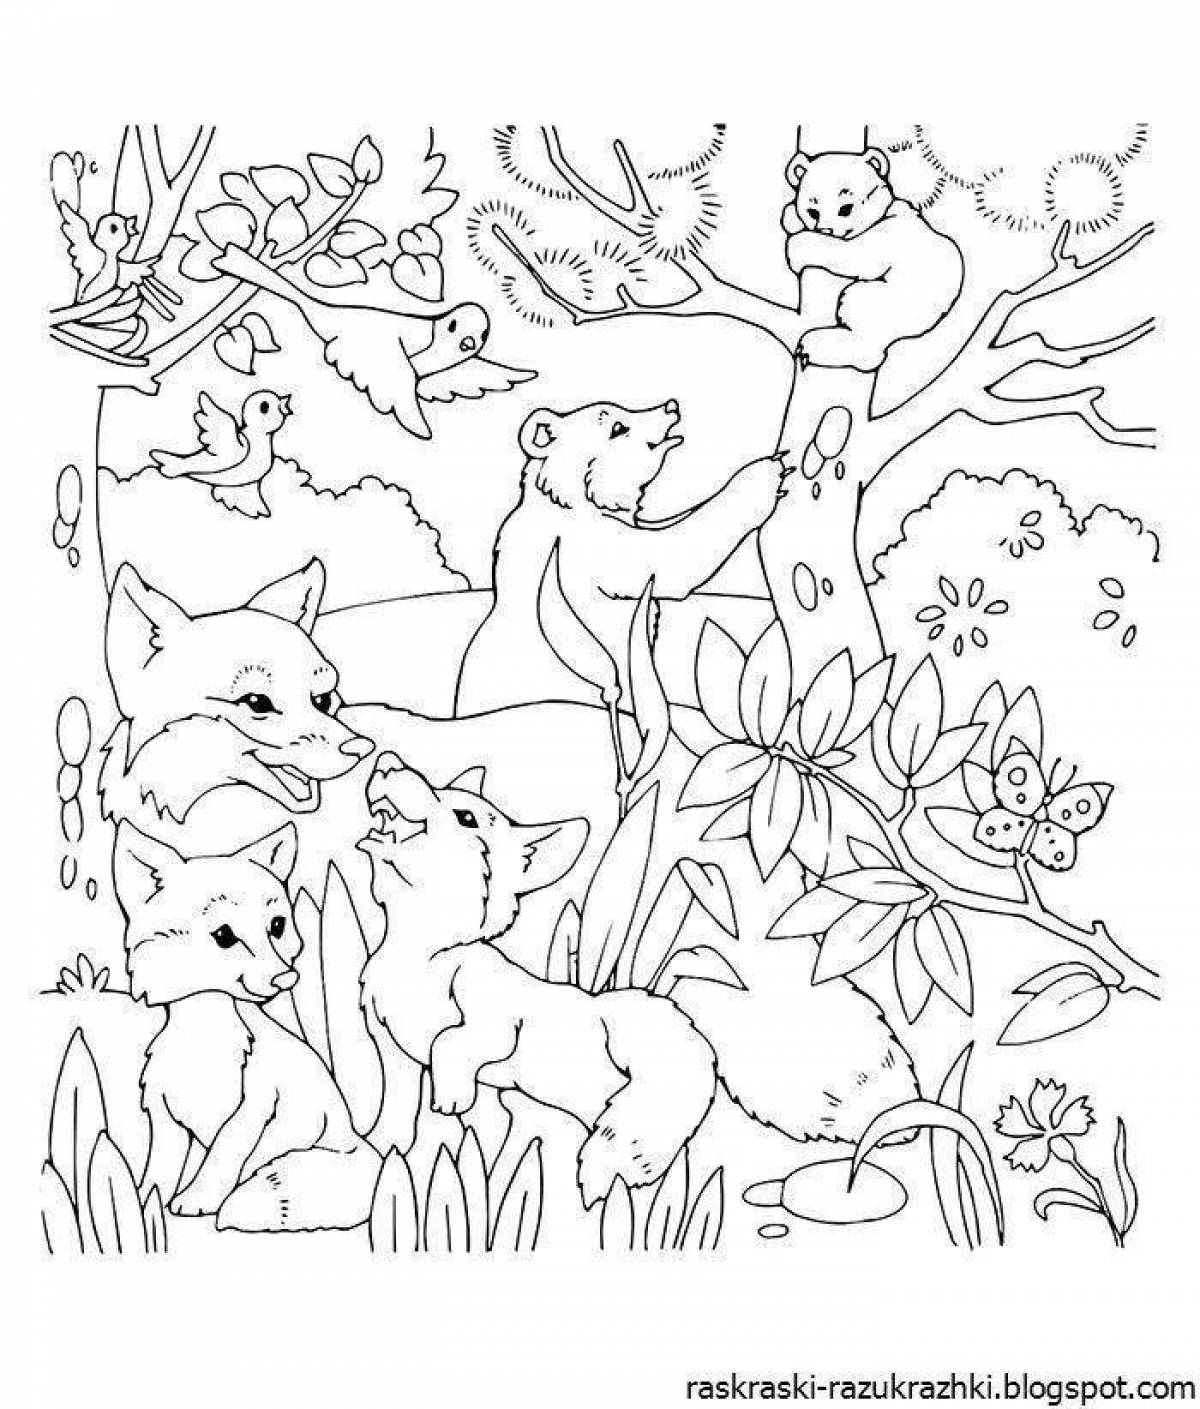 Gorgeous forest animal coloring page